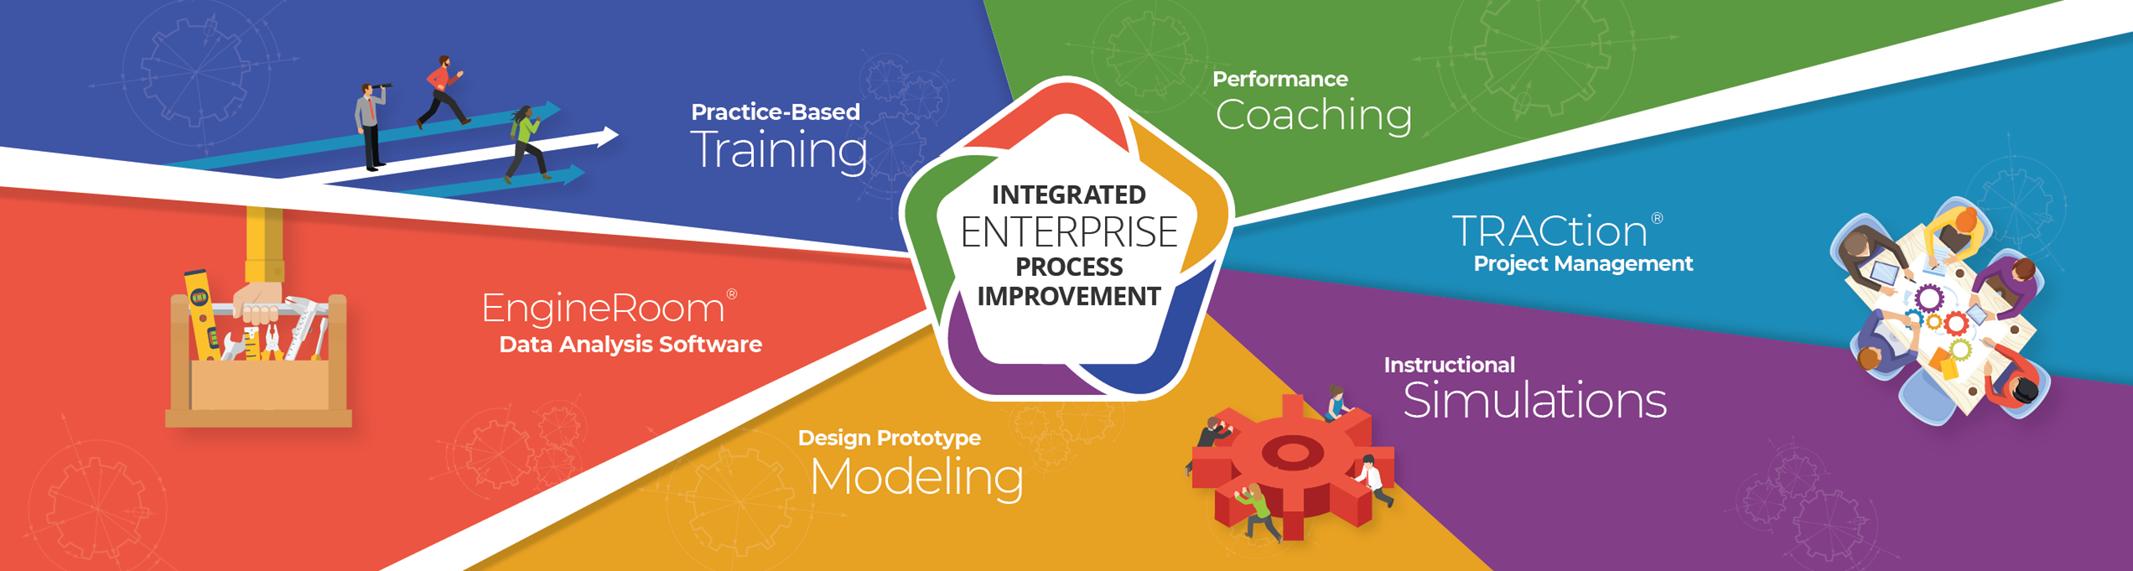 Integrated Enterprise Process Improvement with training, coaching, project management, simulations, process modeling , and data analysis software.